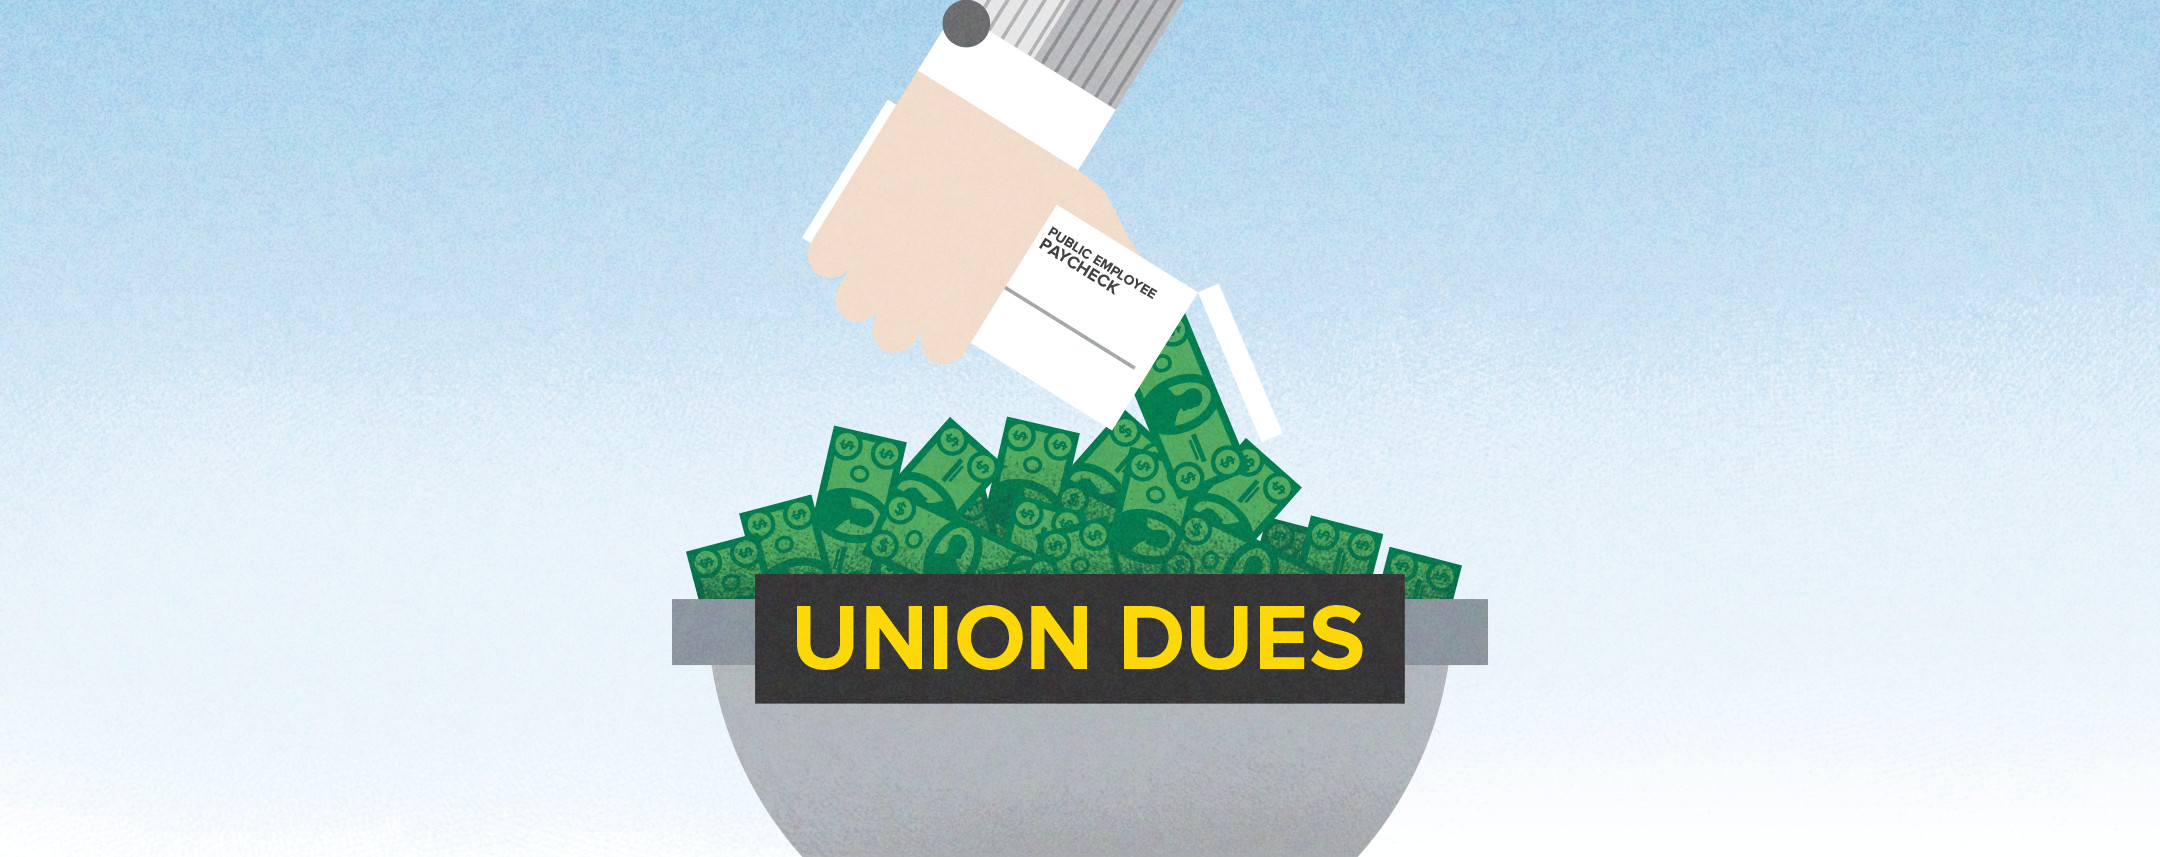 What Are Union Dues